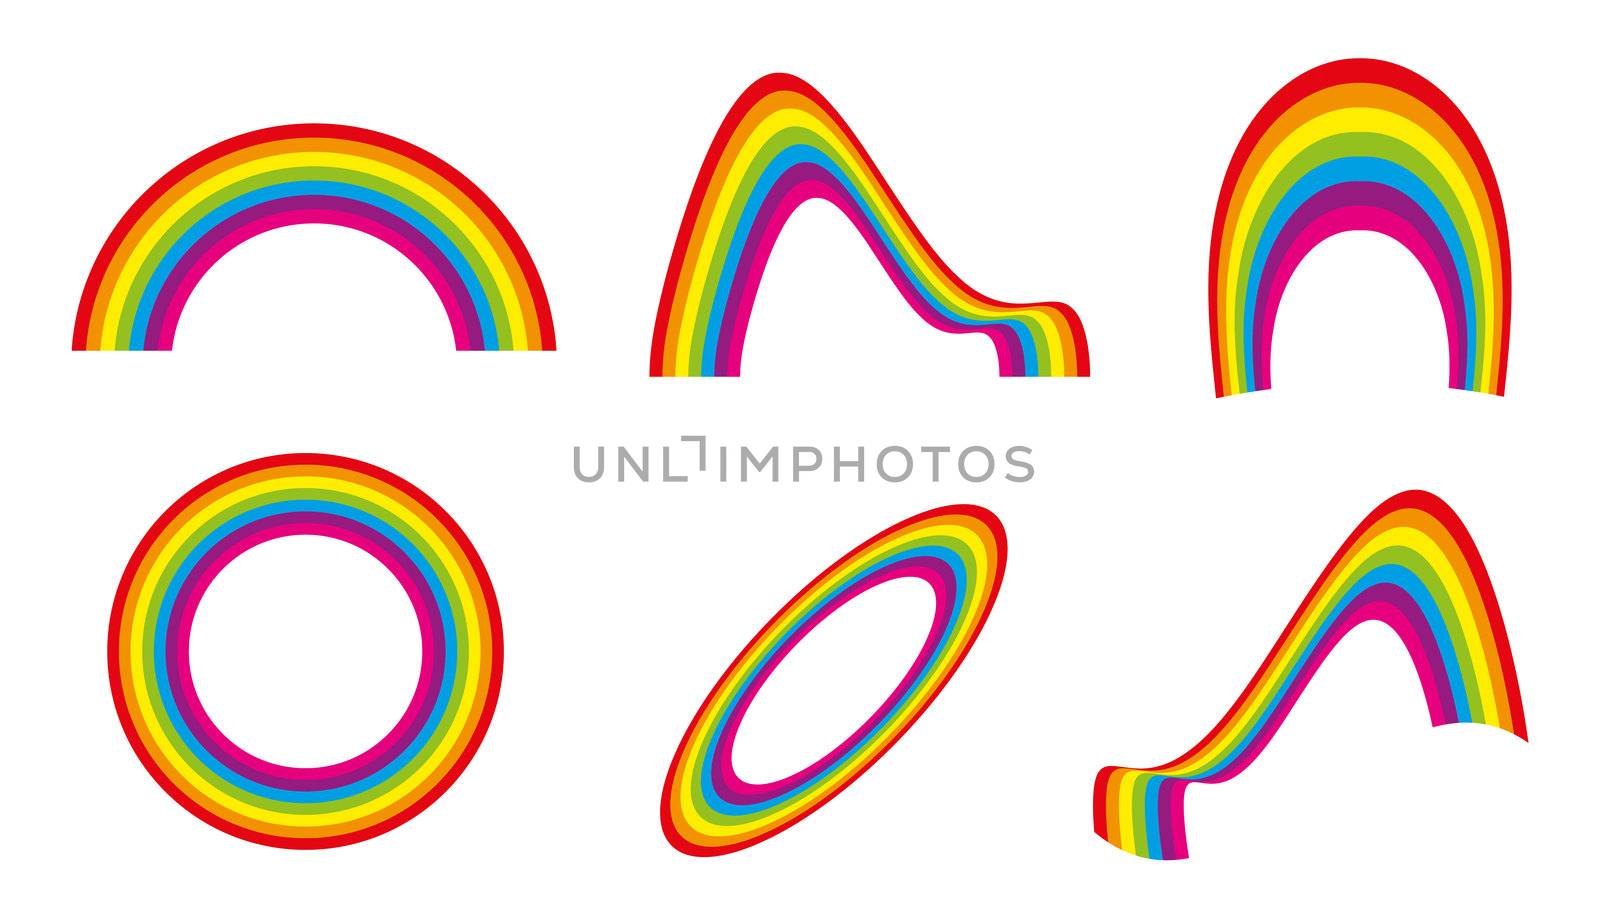 Six different isolated and colored rainbow shapes